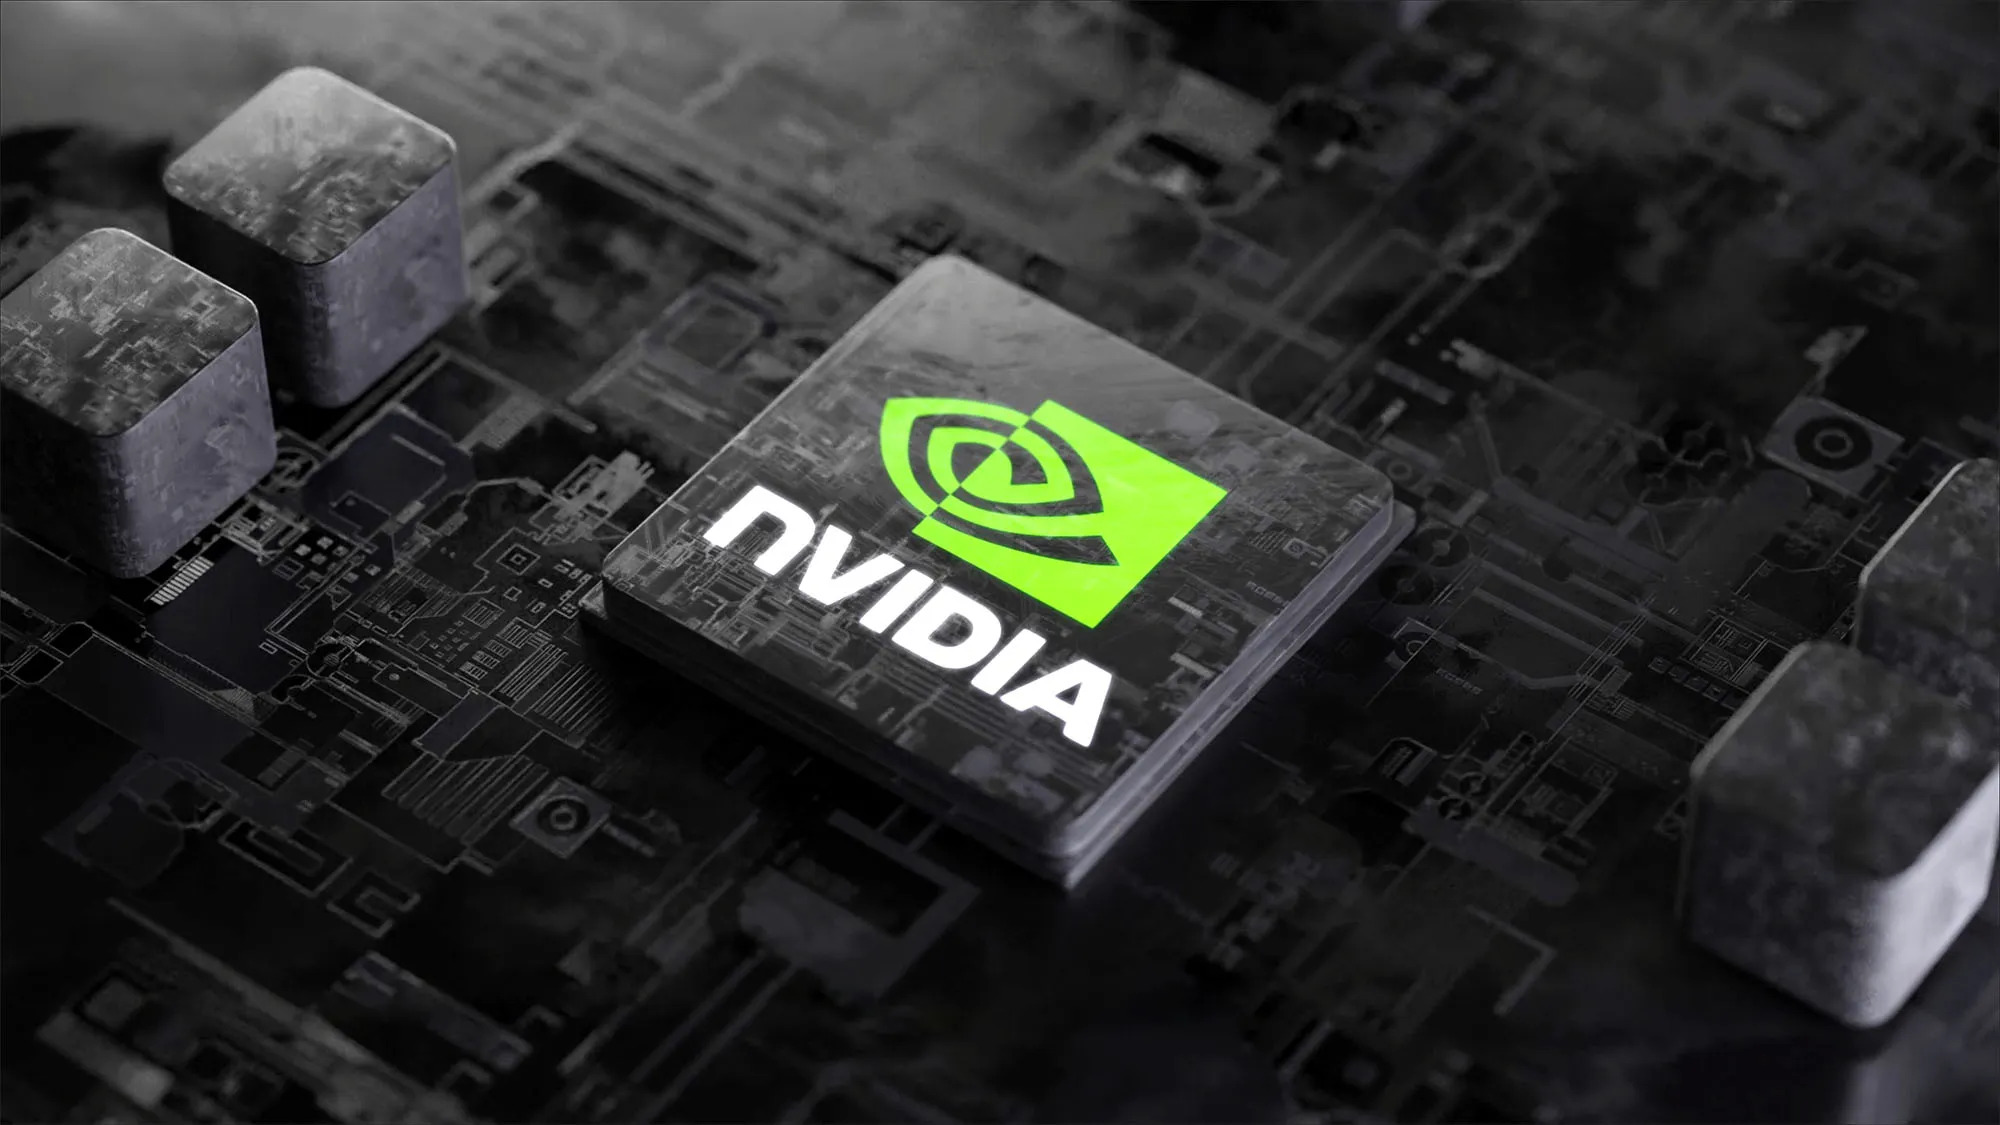 reliance-industries-collaborates-with-nvidia-to-develop-large-language-model